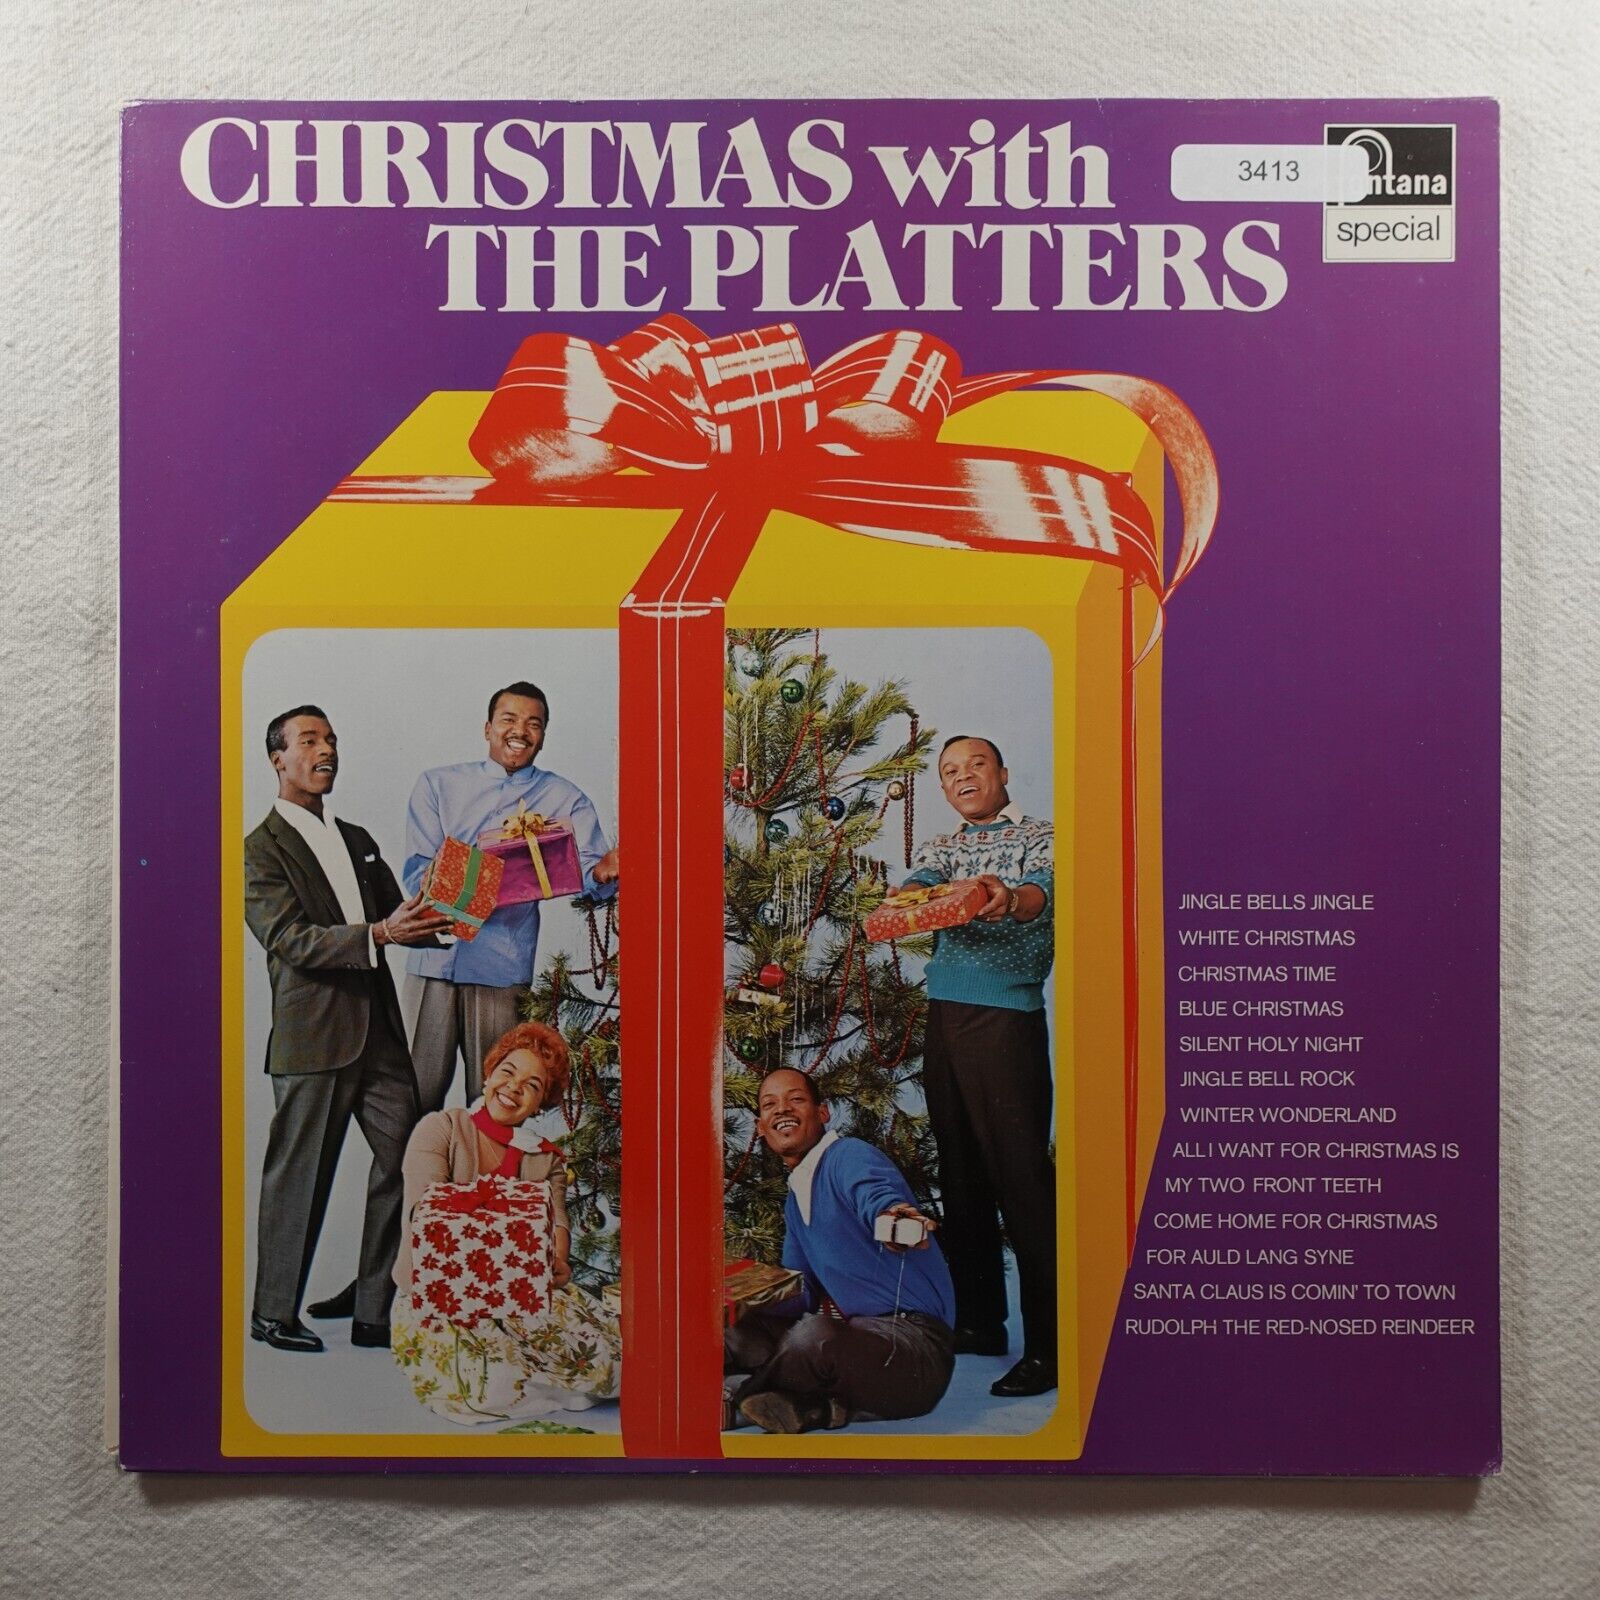 The Platters Christmas With The Platters   Record Album Vinyl LP